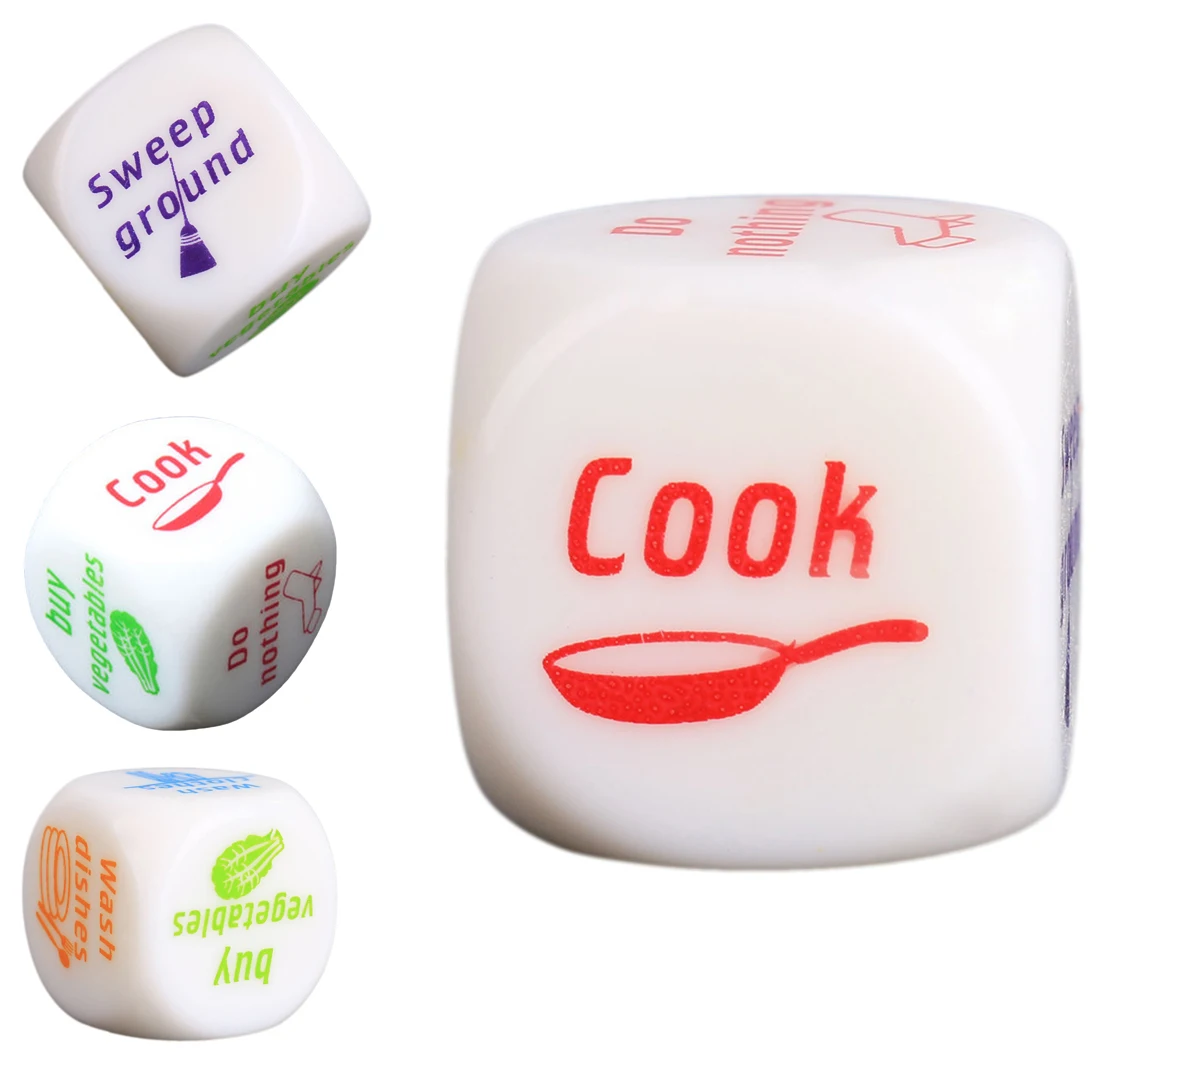 FKaiYin 2Pcs Funny Home Dice Couples Families Housework Distribution Dice Fun Game Gift//Chores Housework Dice//Household Decider for Kids Children Future experience